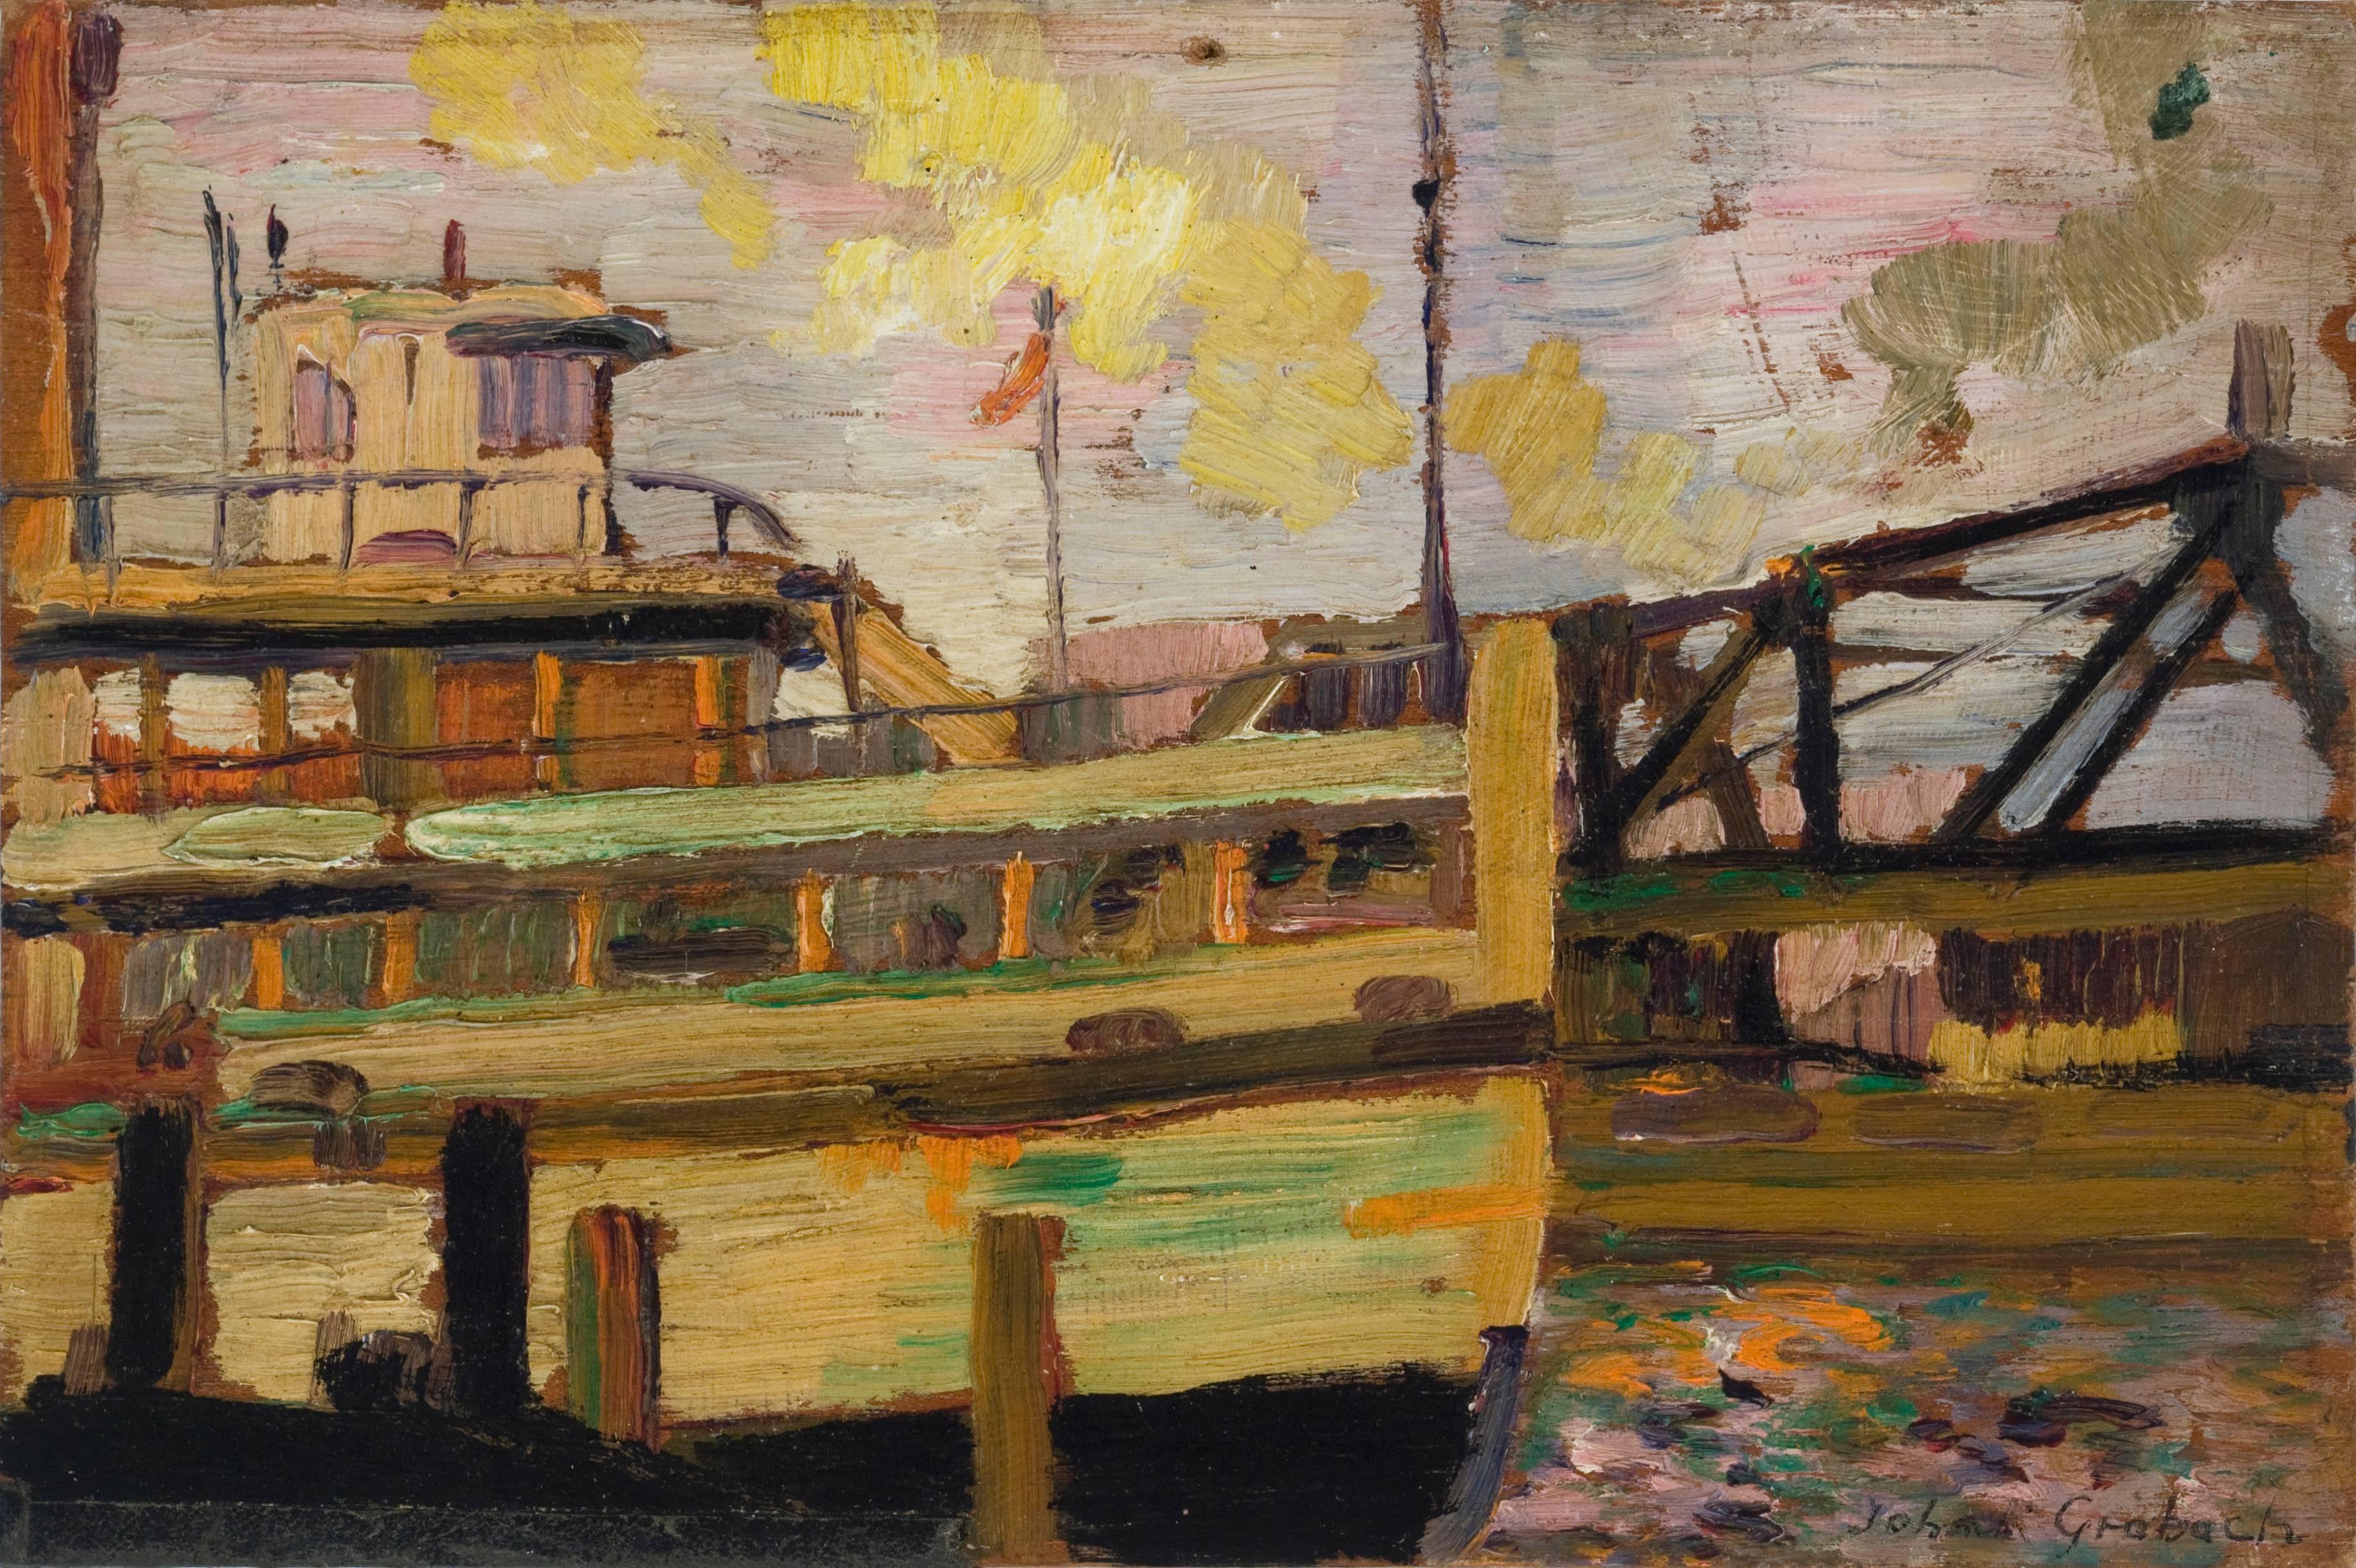 THE FERRY - Painting by John R. Grabach